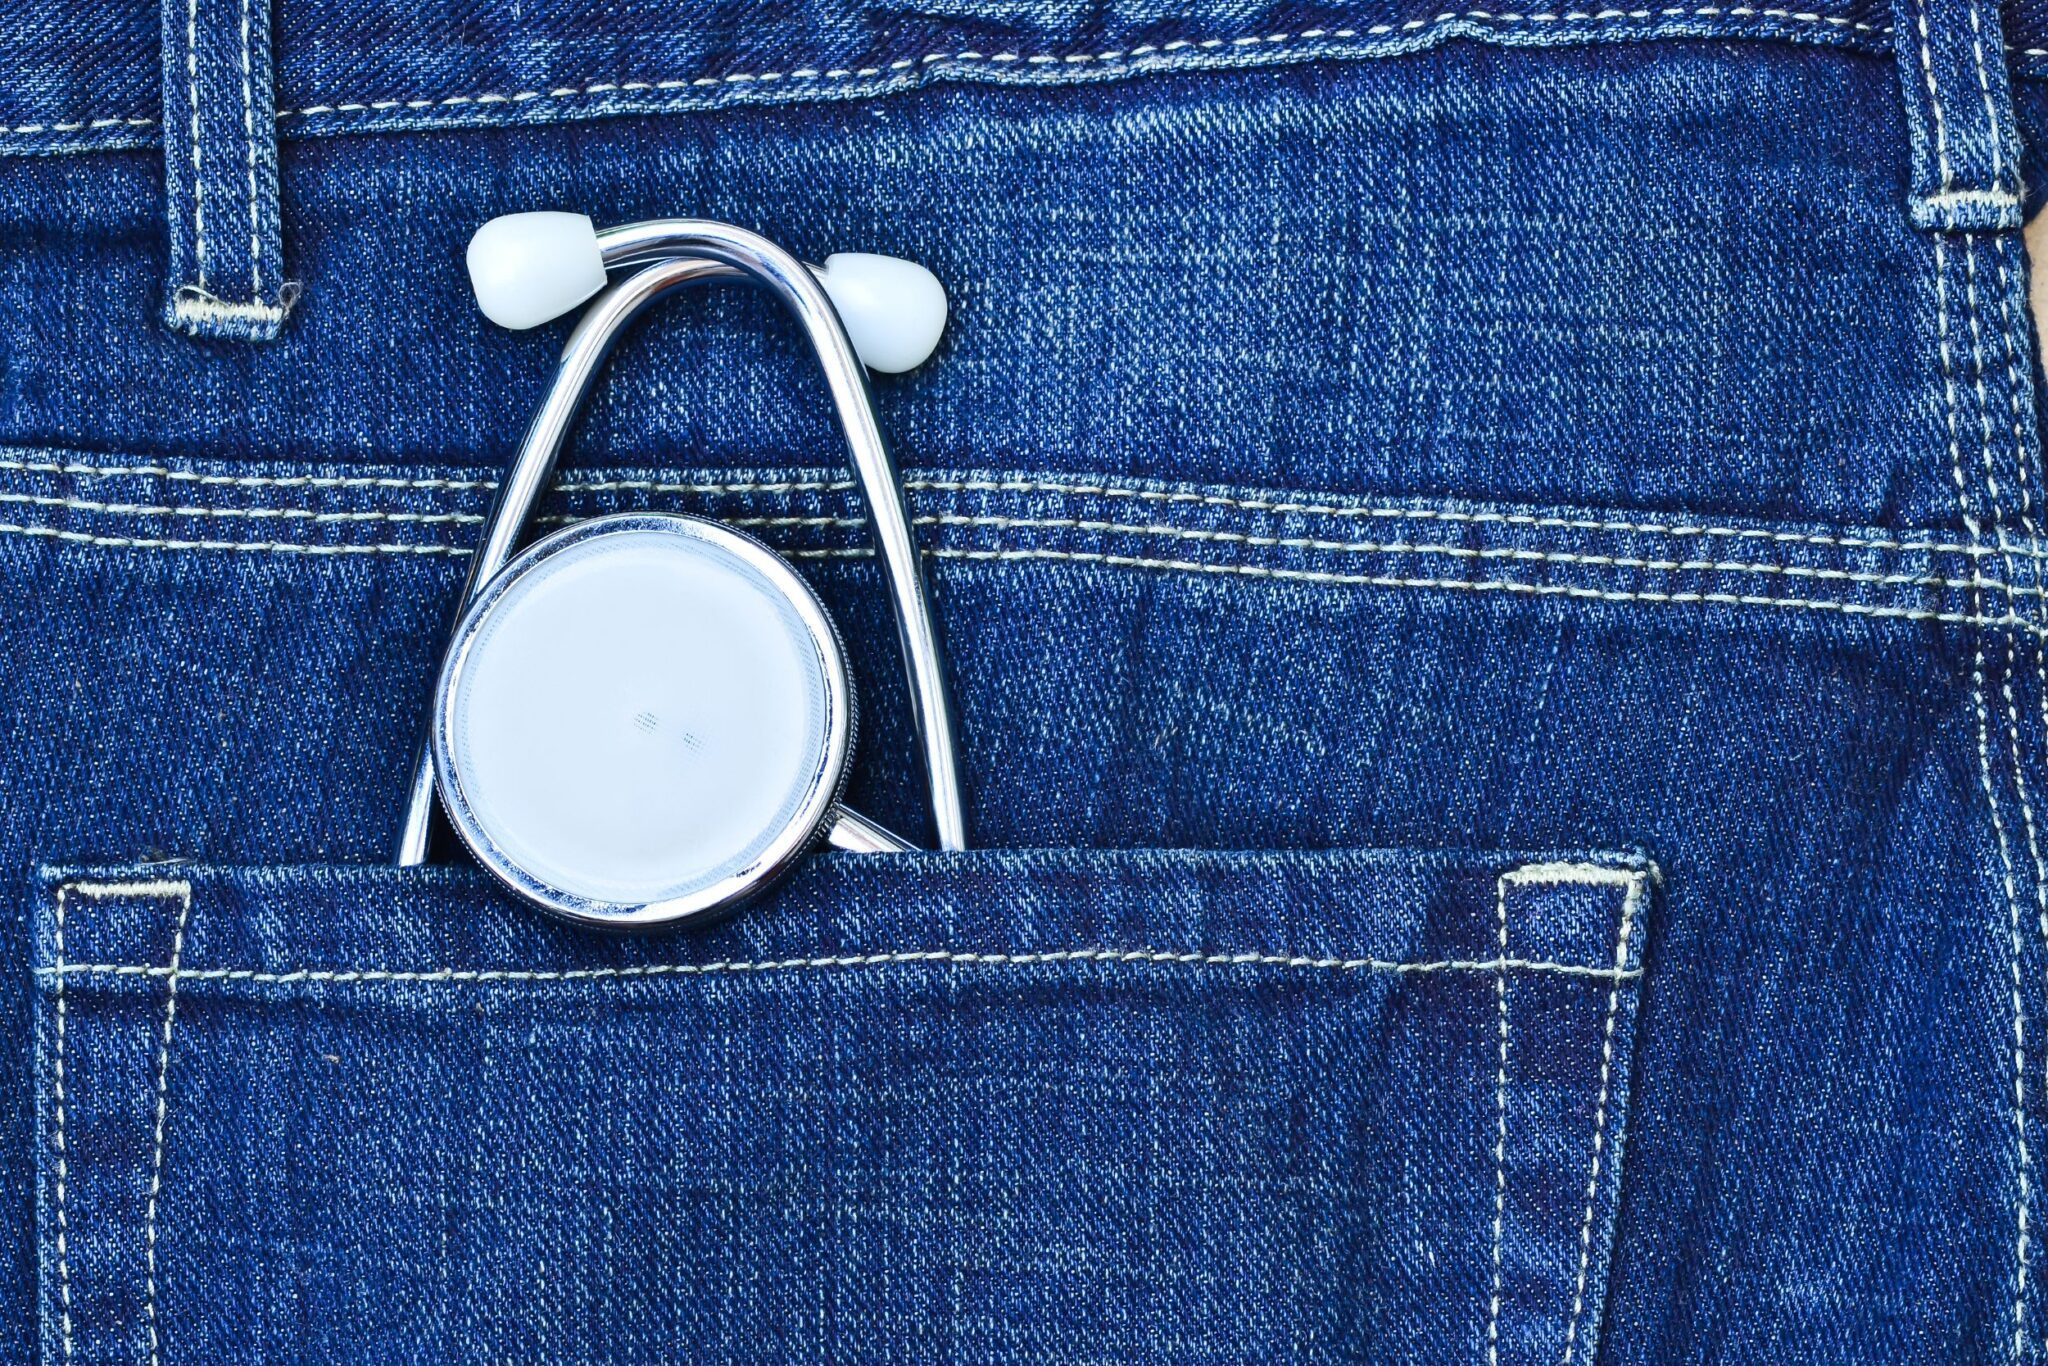 A stethoscope in the back pocket of a pair of blue jeans